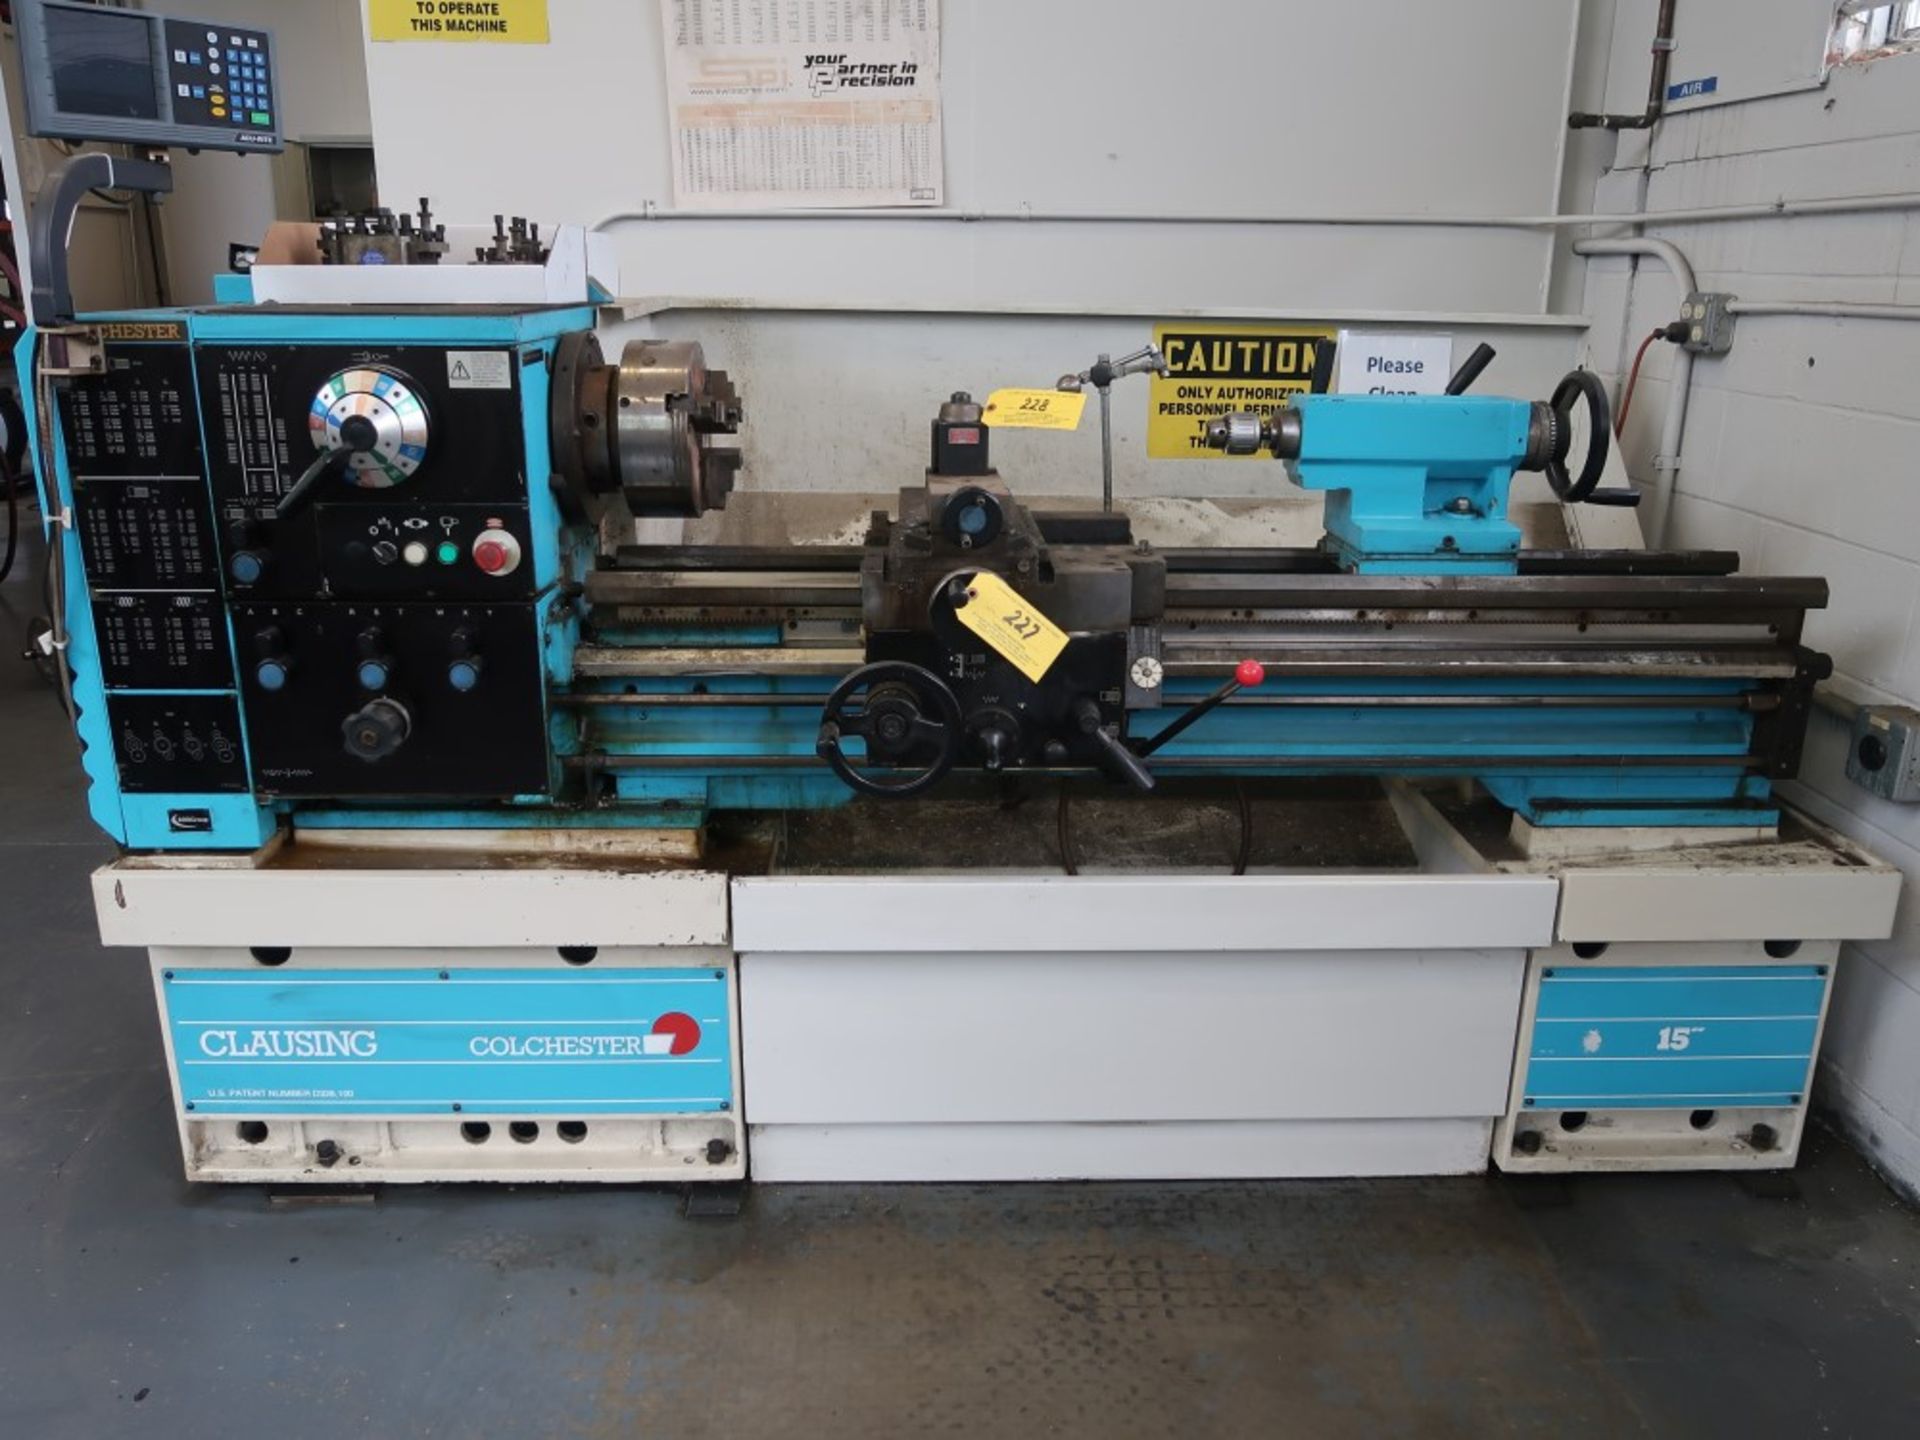 2001 Clausing Colchester 15" Toolroom Lathe S/N CG0152 Spindle Speed 20-2500 RPM w/ Accu-Rite DRO - Image 2 of 8